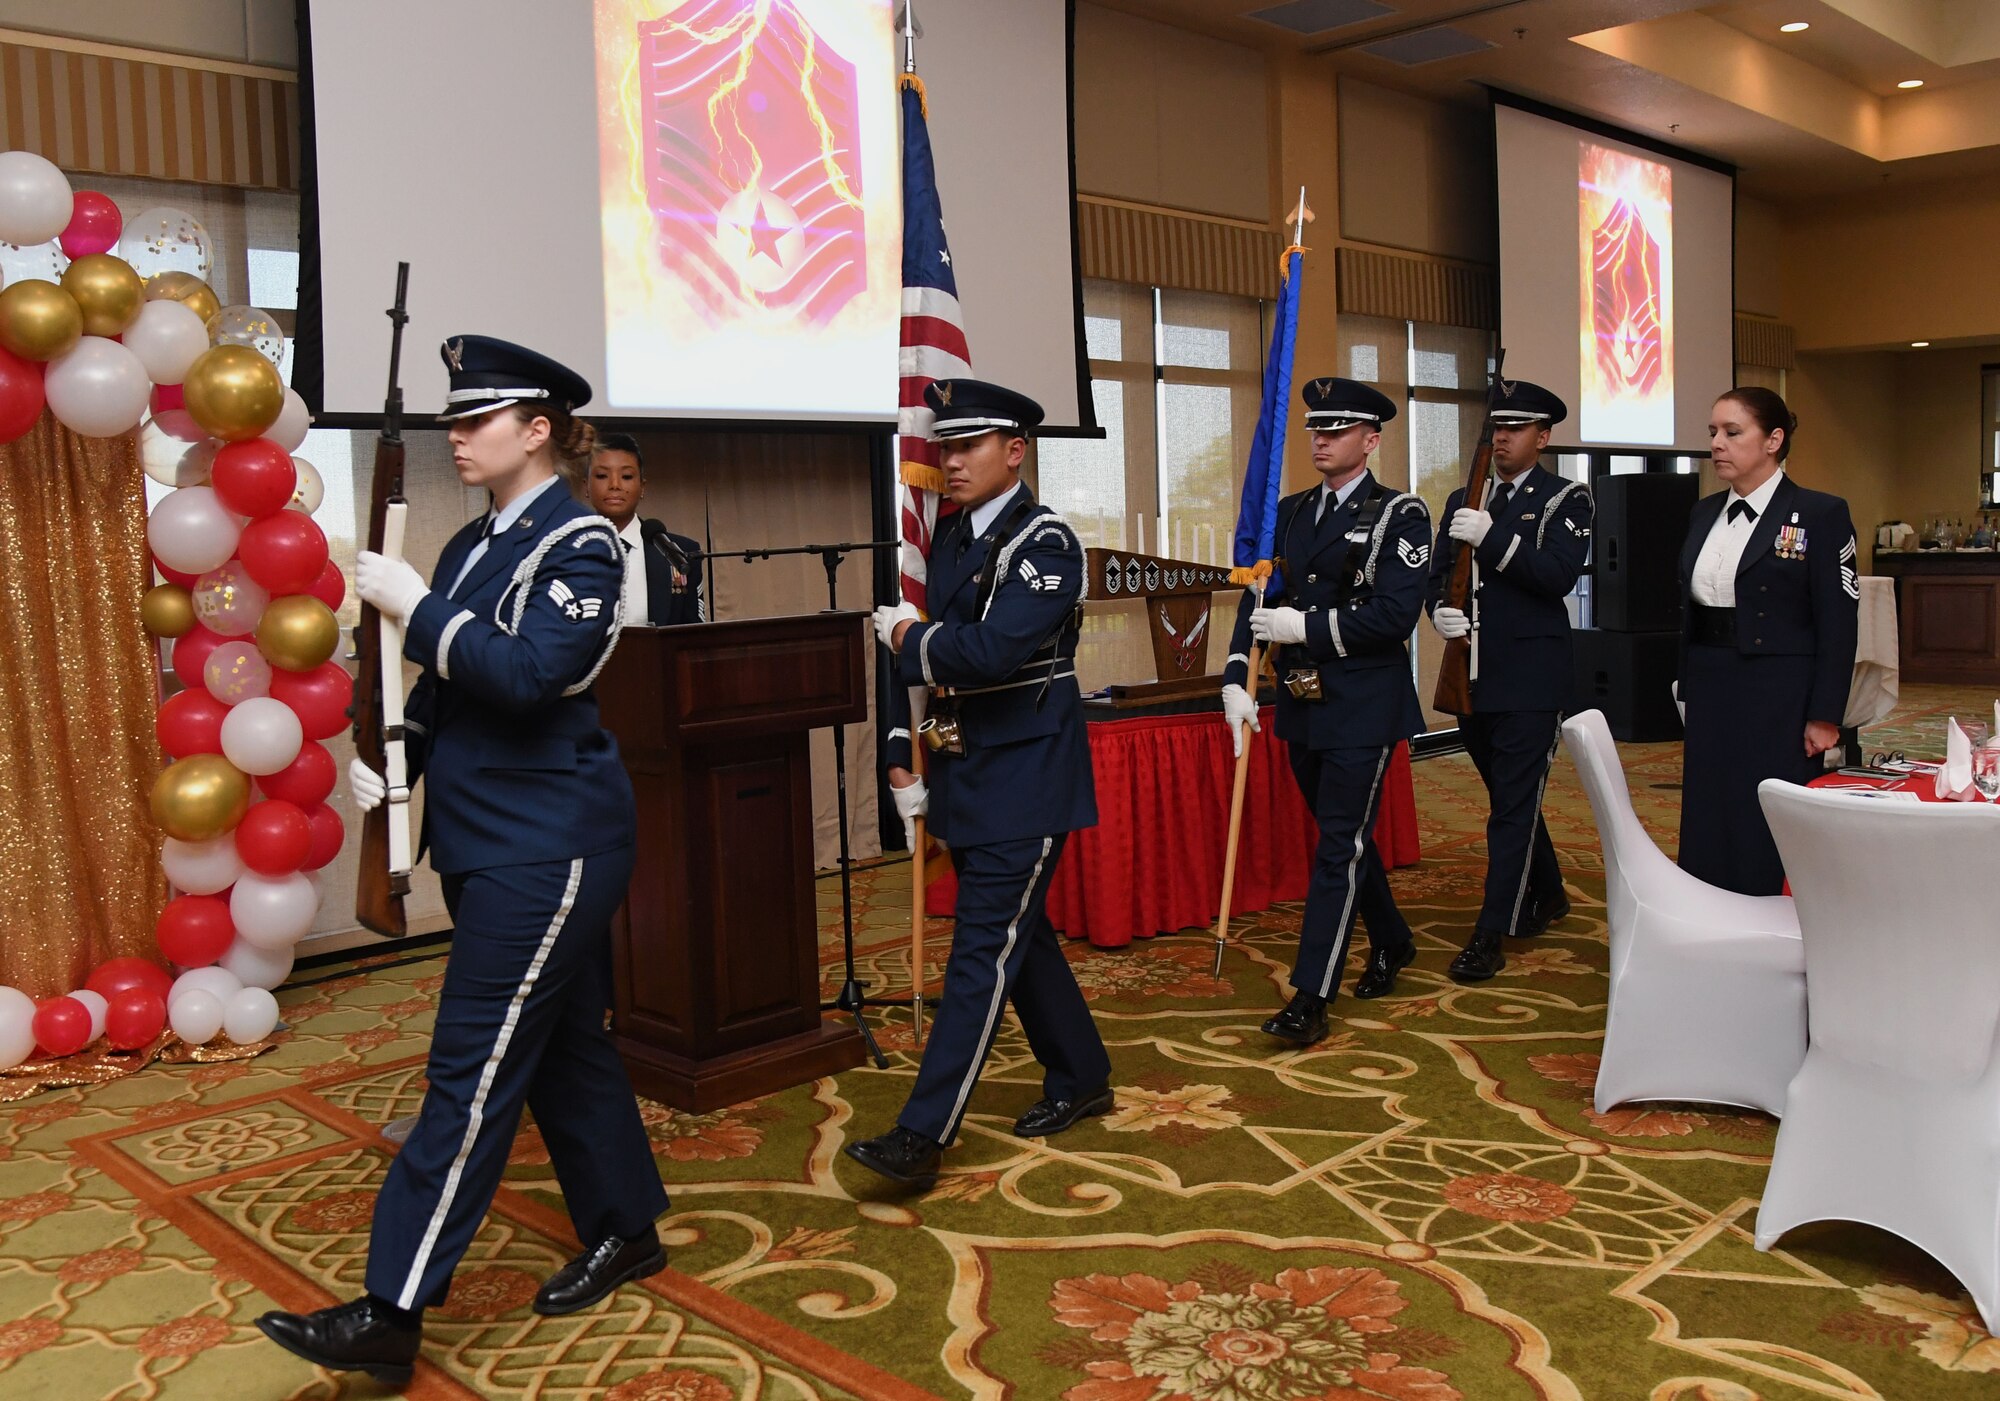 Members of the Keesler Honor Guard present the colors during the Chief Master Sergeant Recognition Ceremony inside the Bay Breeze Event Center at Keesler Air Force Base, Mississippi, April 8, 2022. Four Keesler Airmen earned their chief master sergeant stripe during the 2022 promotion release. Chief master sergeants make up one percent of the Air Force enlisted force. (U.S. Air Force photo by Kemberly Groue)